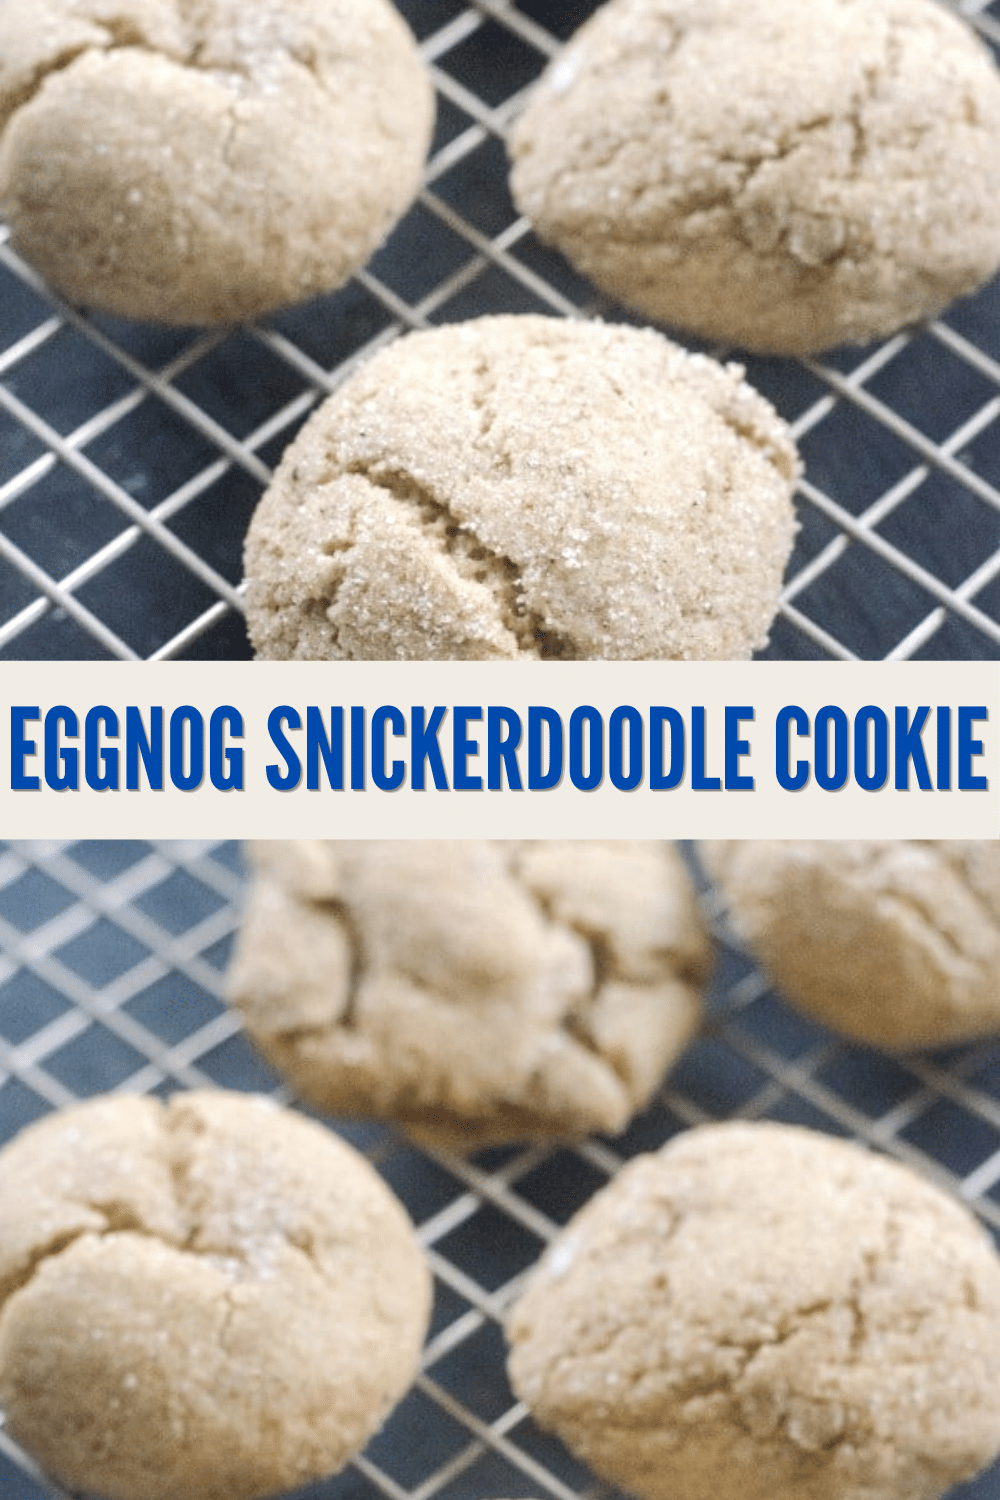 These eggnog snickerdoodles are perfect for your Christmas cookie jar or cookie exchange! Chewy, delicious, and so easy to make! #Christmas #cookies #eggnog via @wondermomwannab